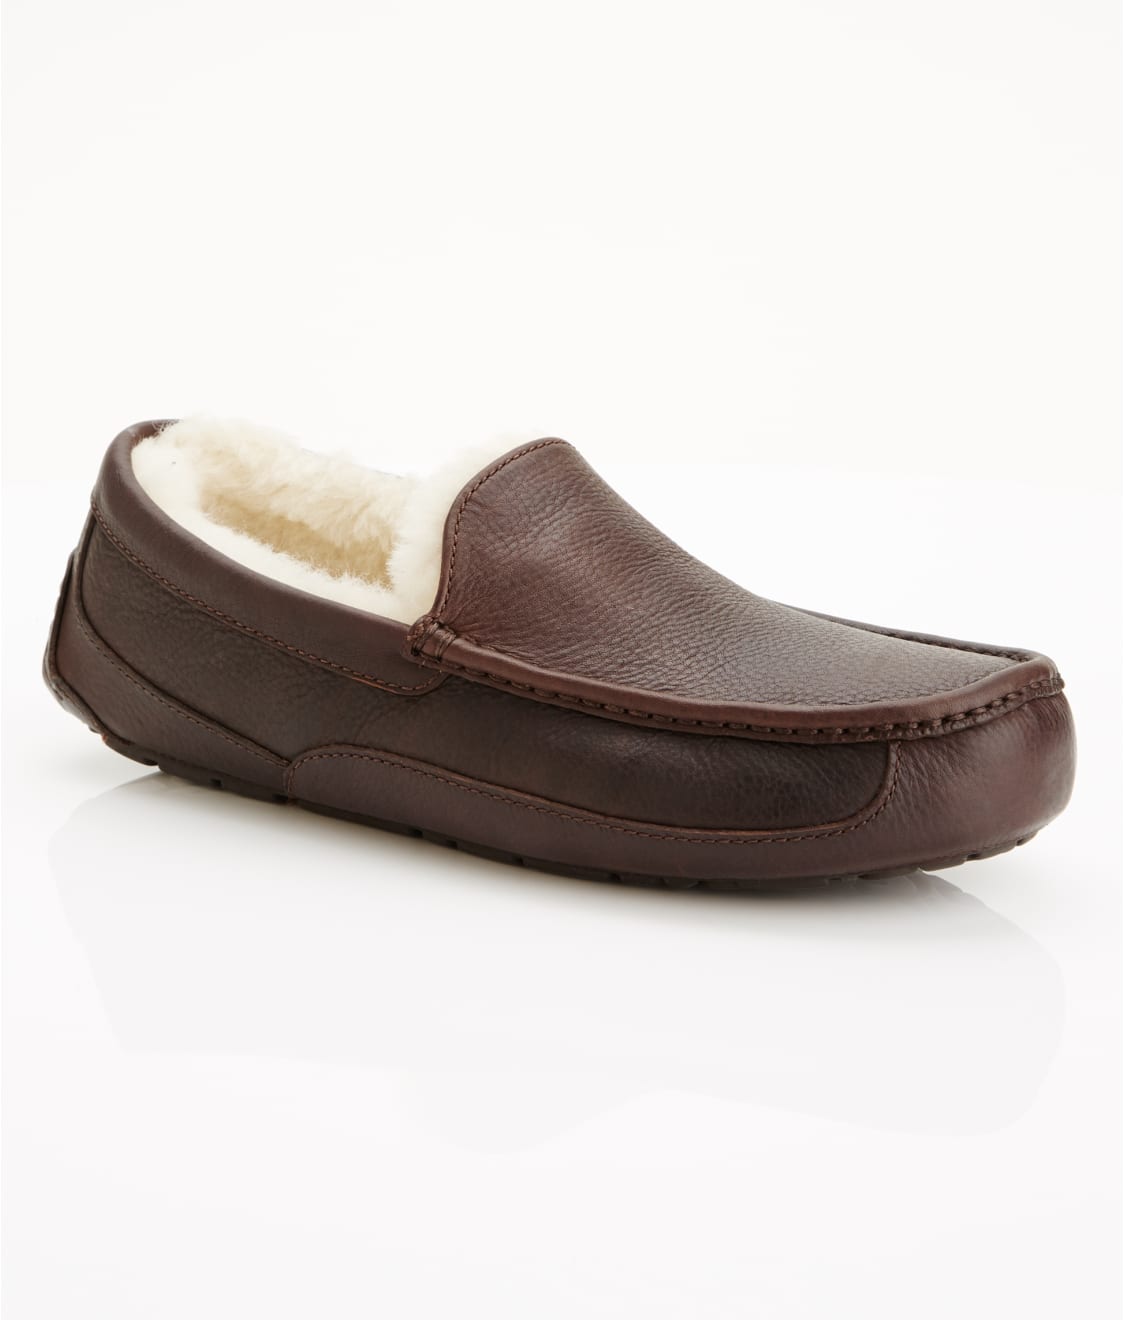 UGG Men's Ascot Leather Slippers & Reviews | Bare Necessities (Style 5379)